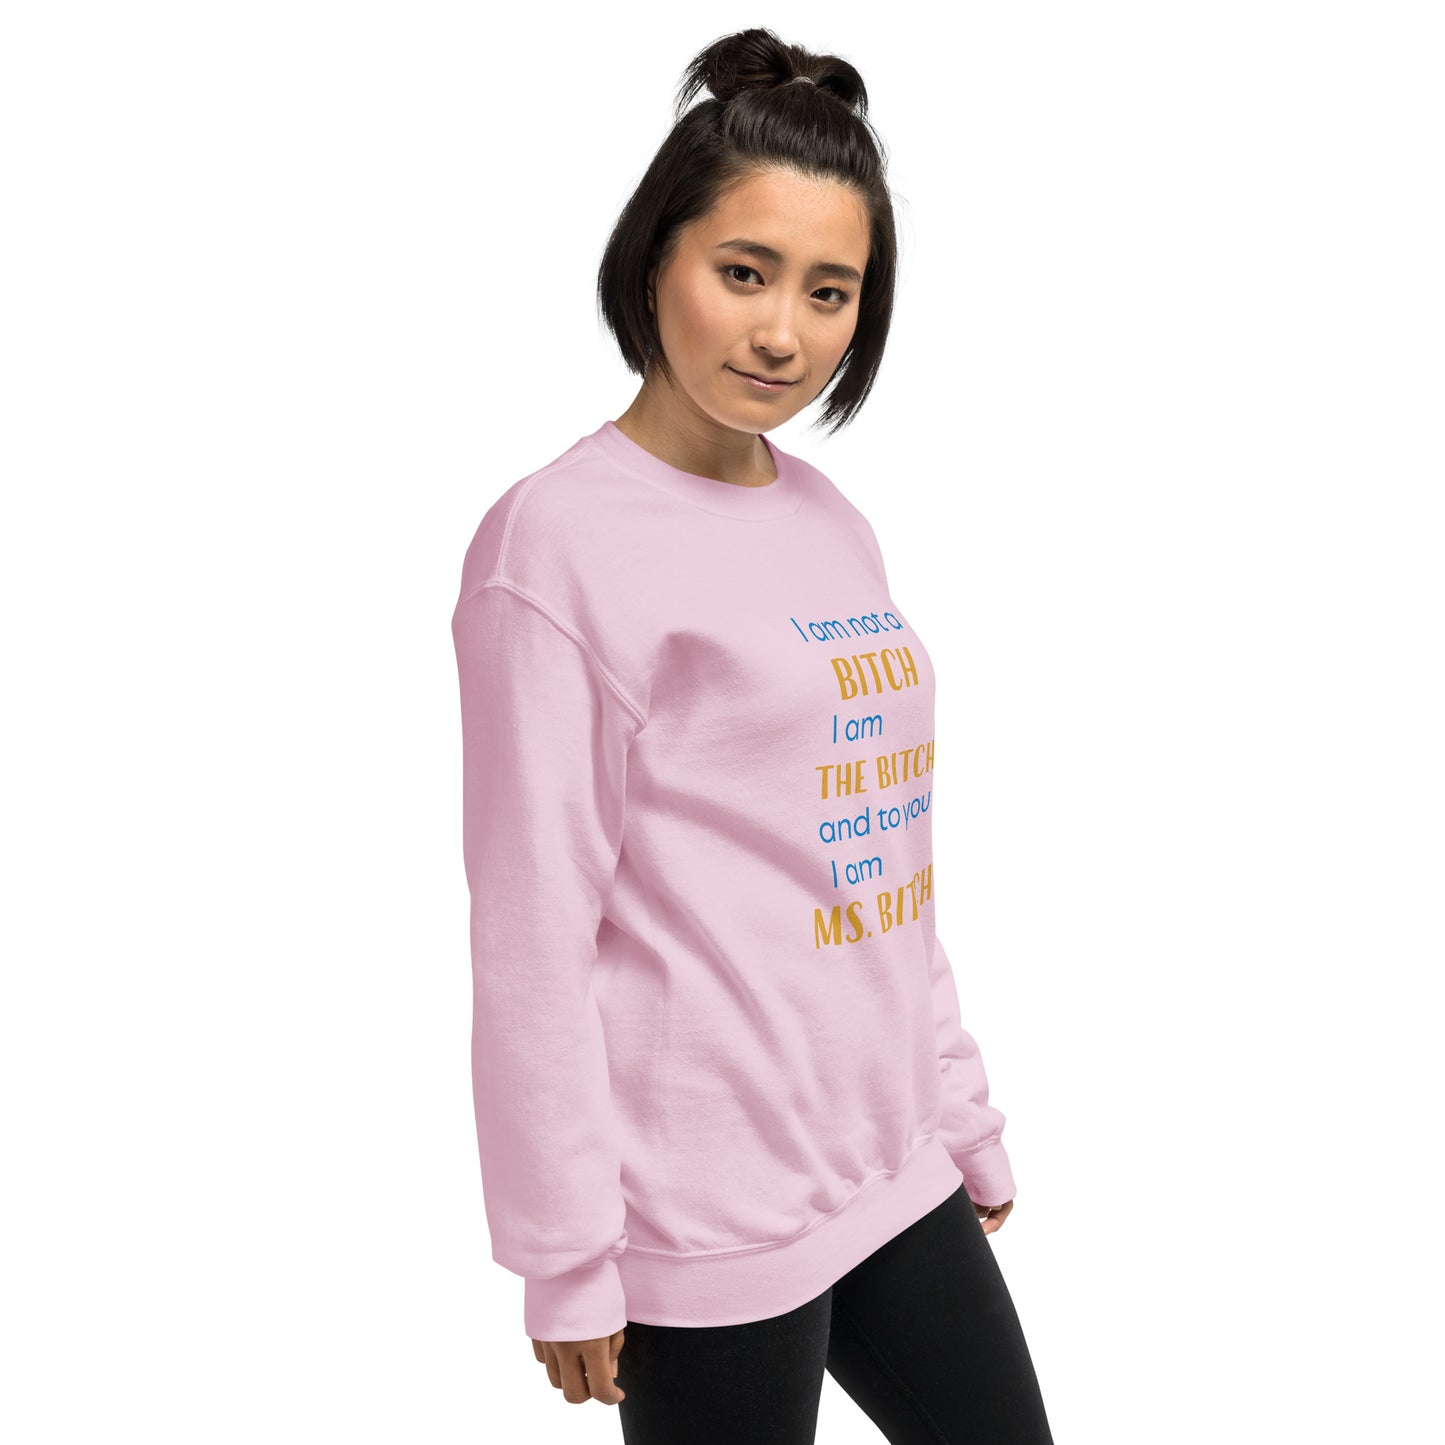 Women with pink sweatshirt with the text "to you I'm MS bitch"